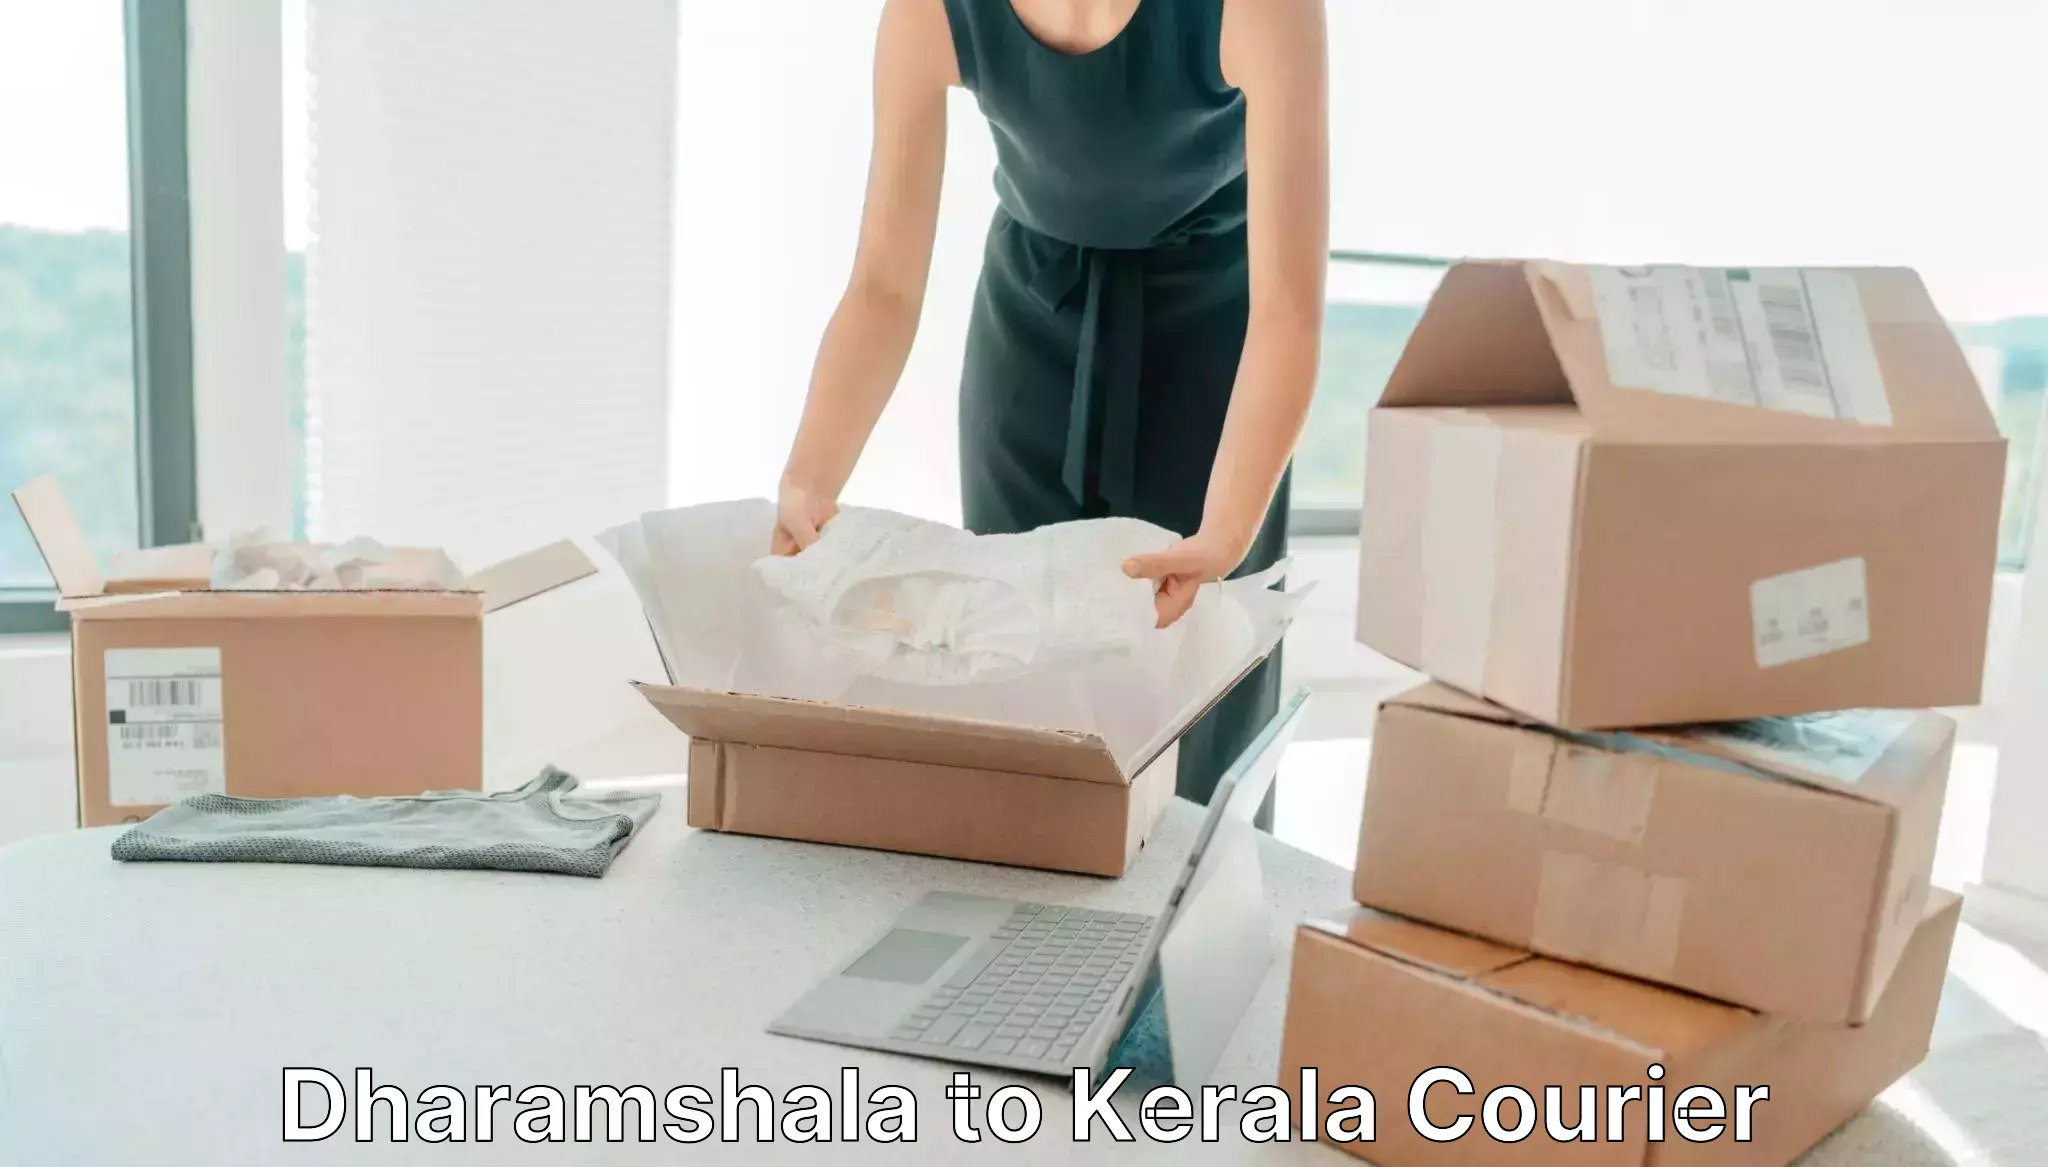 Digital shipping tools Dharamshala to Cochin University of Science and Technology